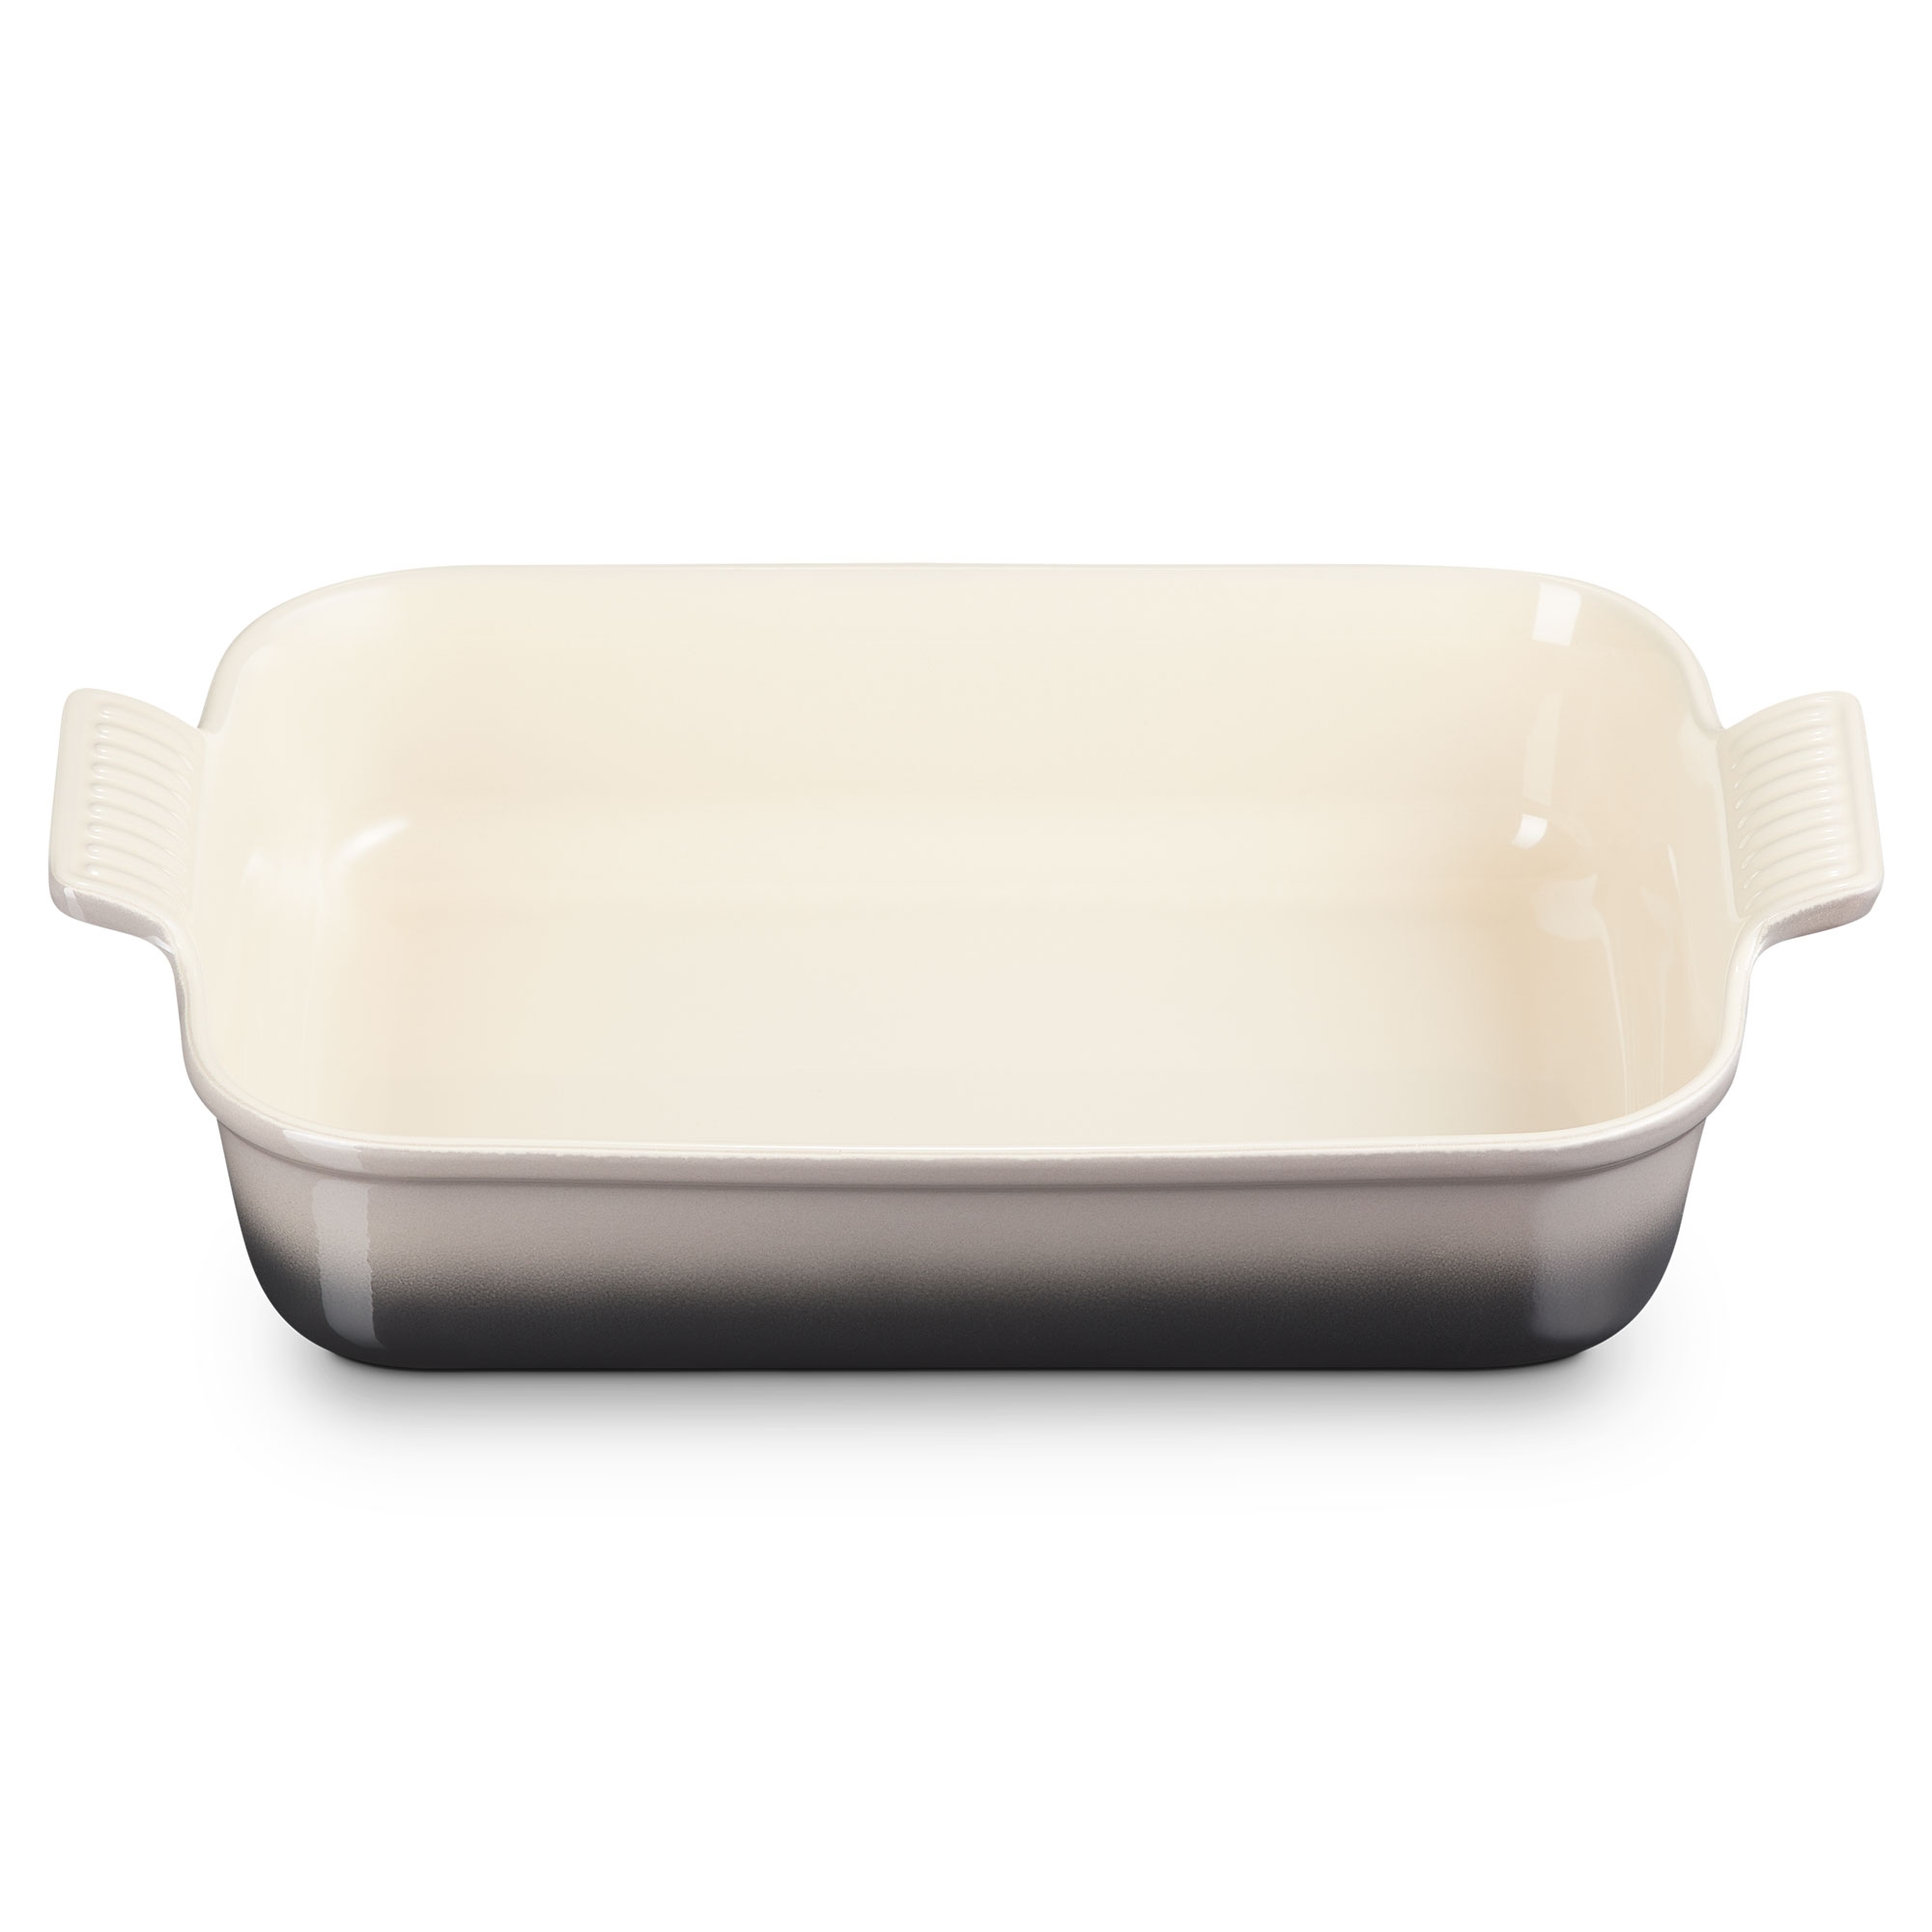 Le Creuset - Baking Dish Tradition - Heritage